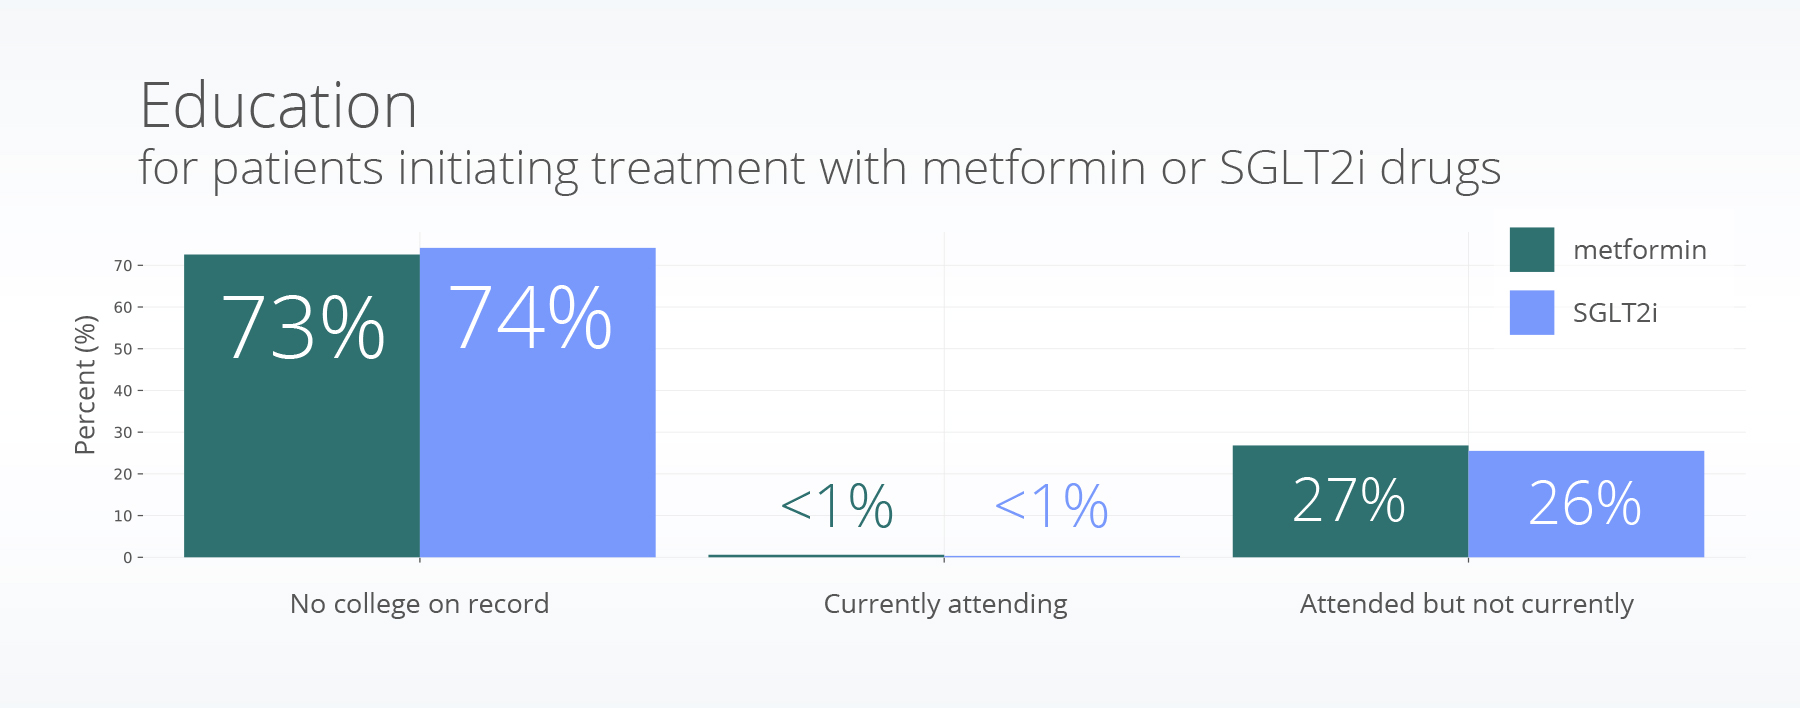 Education for patients initiating treatment with metformin or SGLT2i drugs